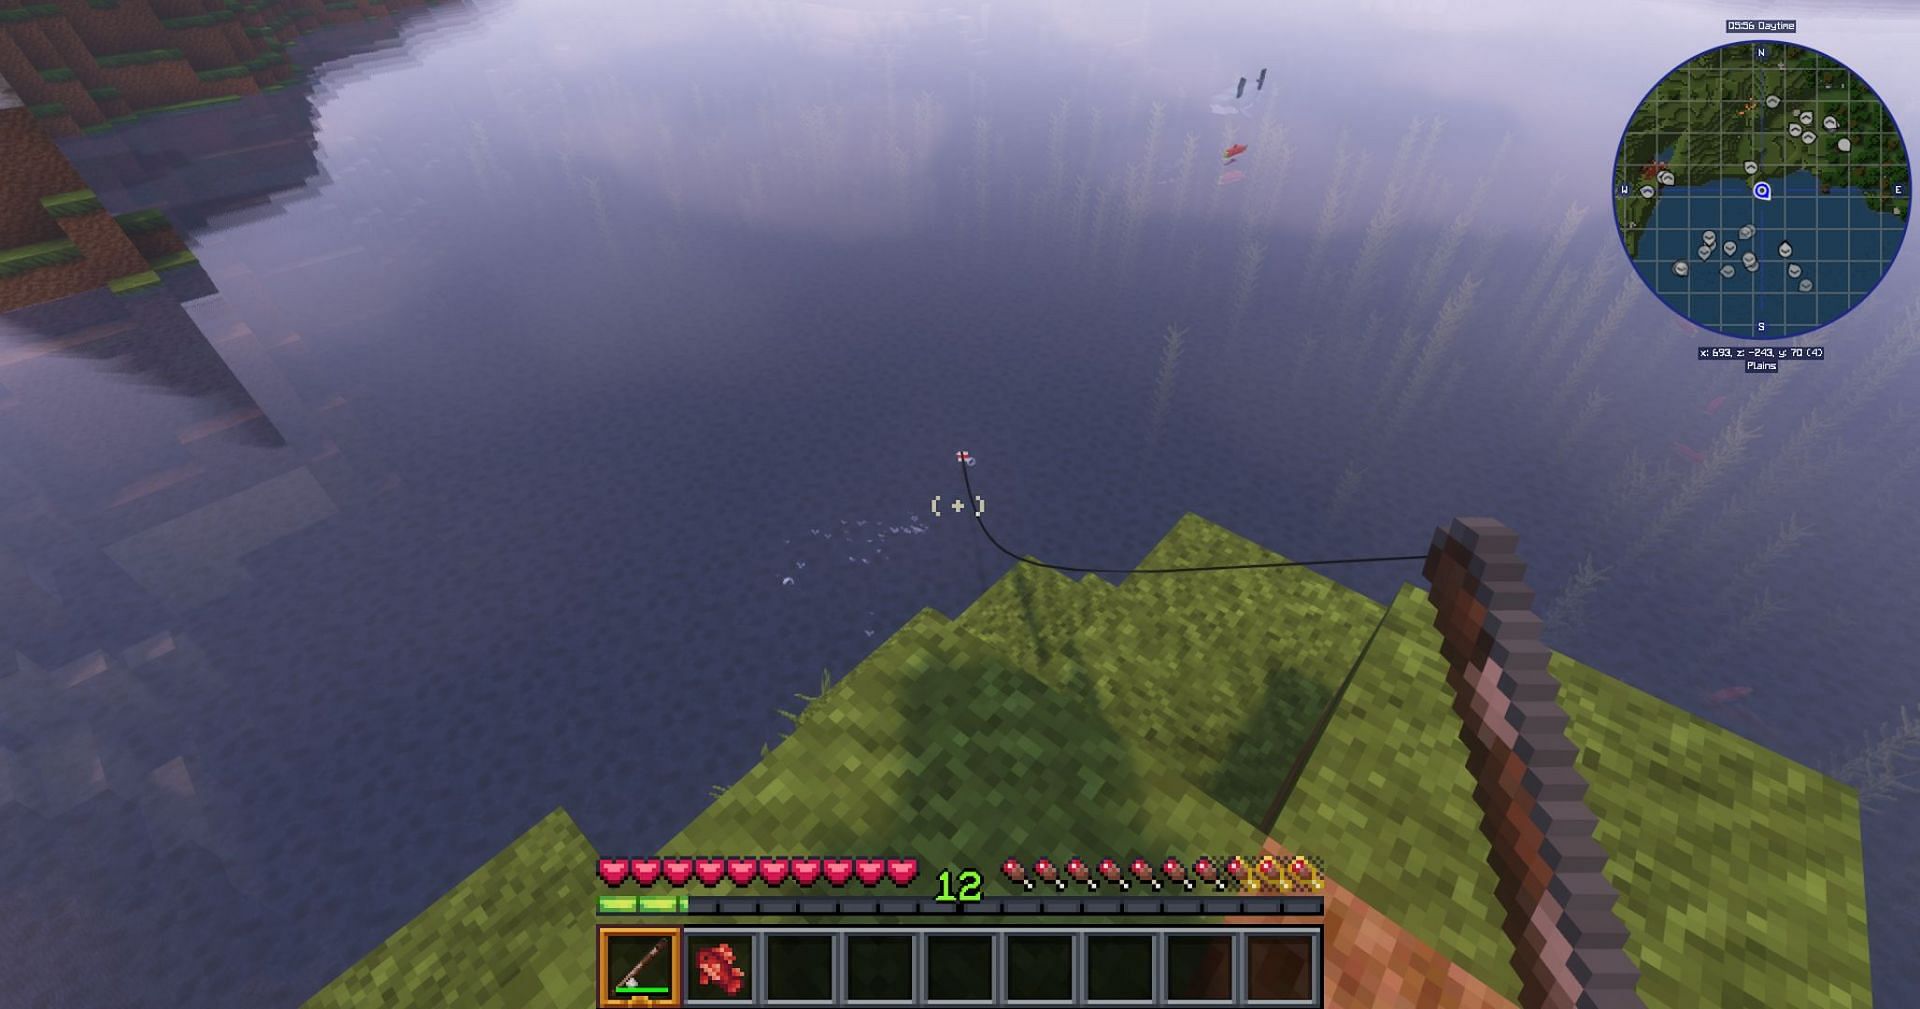 While not recommended, fishing could slowly assemble a god rod. (Image via Mojang)